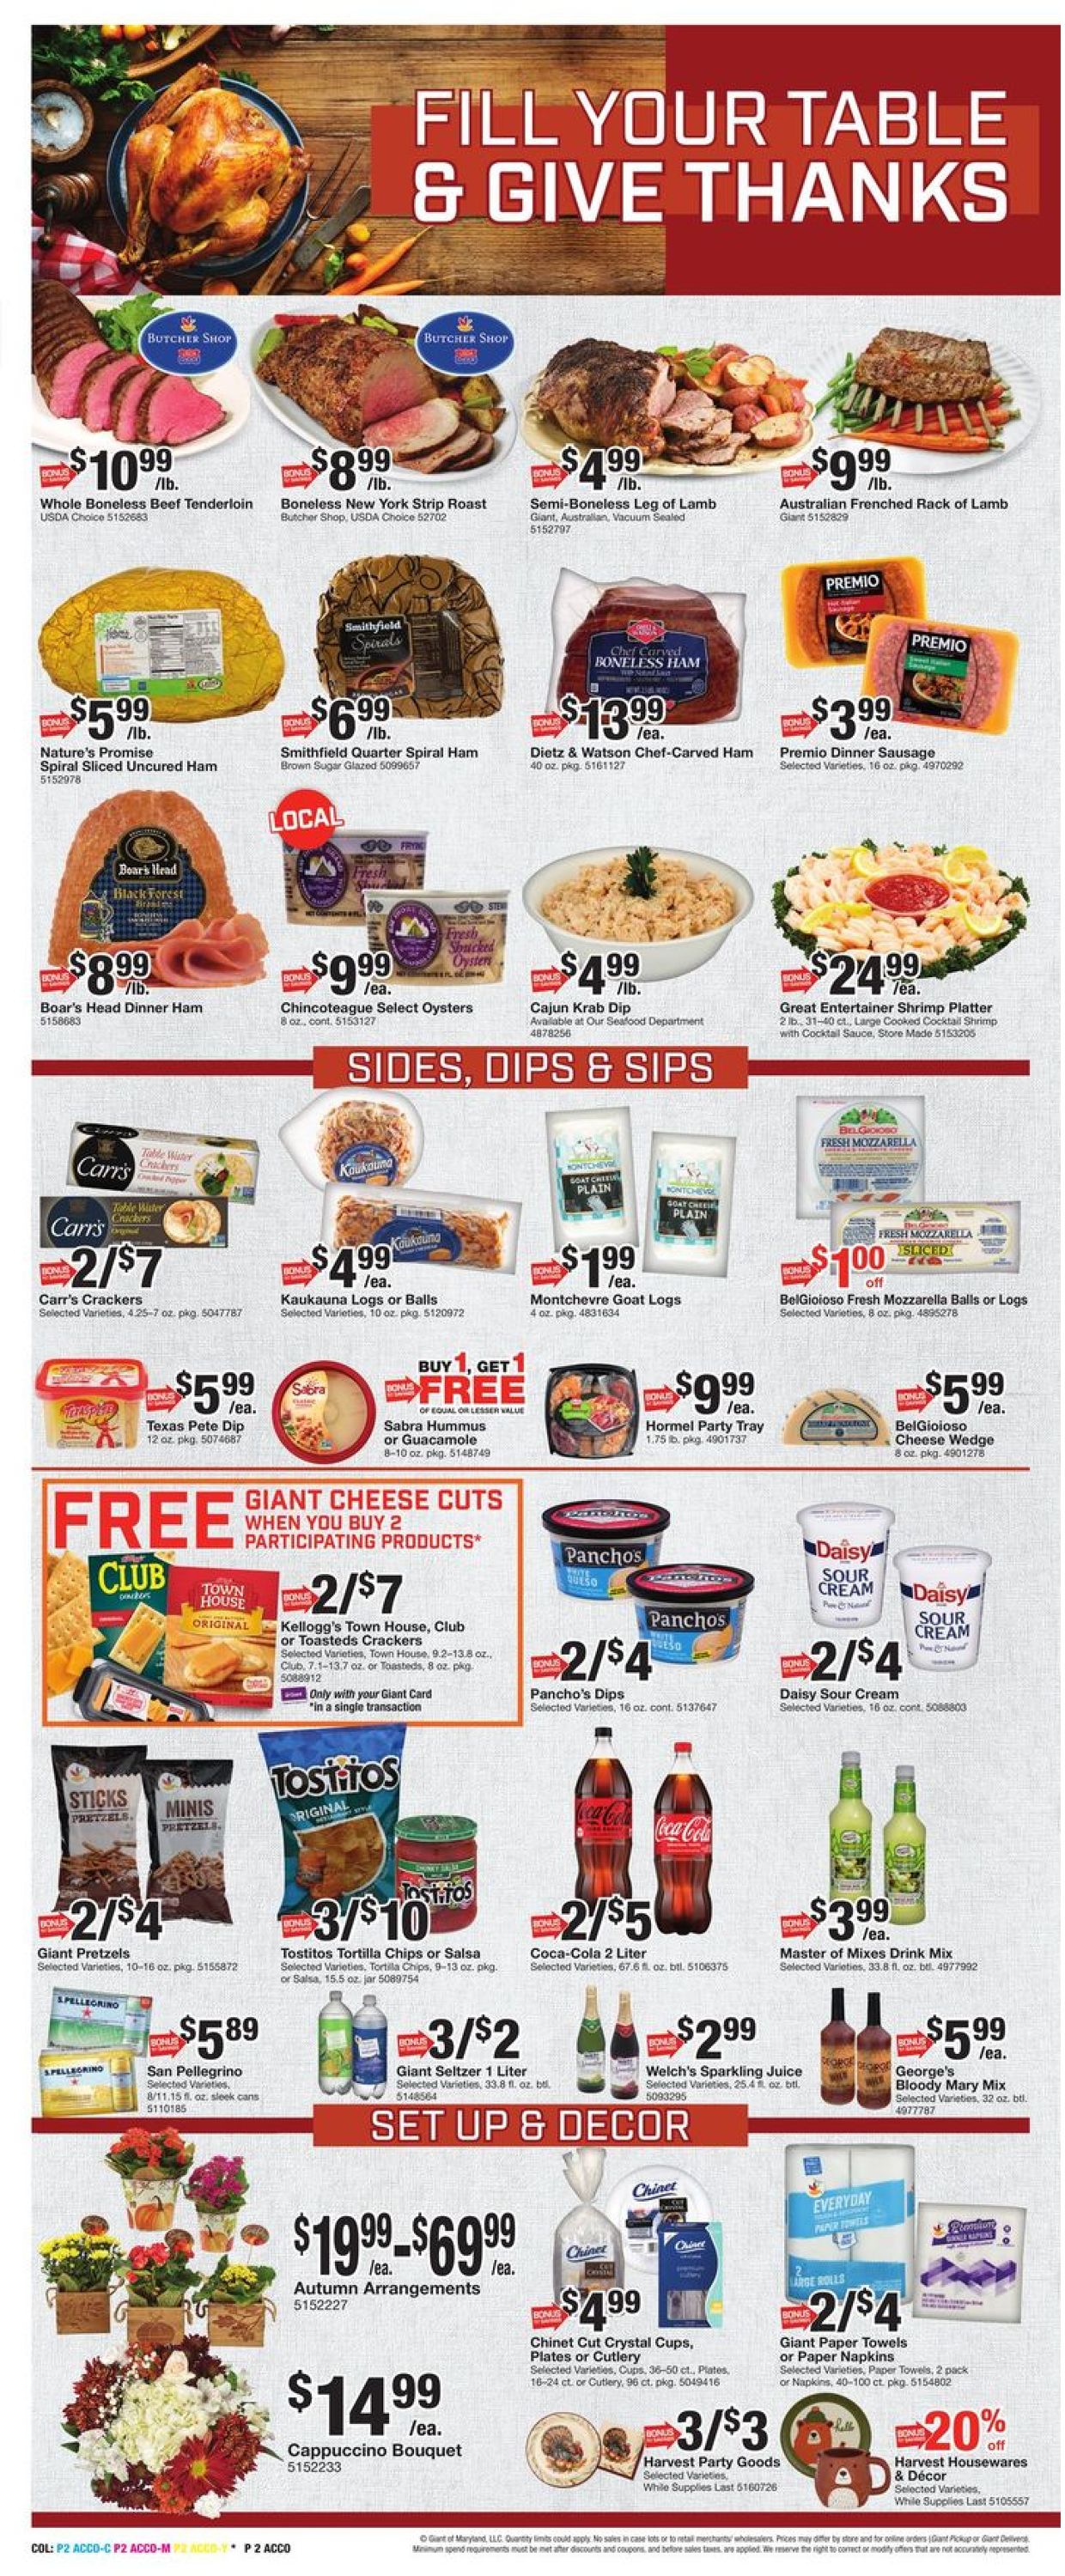 Giant Food THANKSGIVING 2021 Weekly Ad Circular - valid 11/19-11/25/2021 (Page 4)